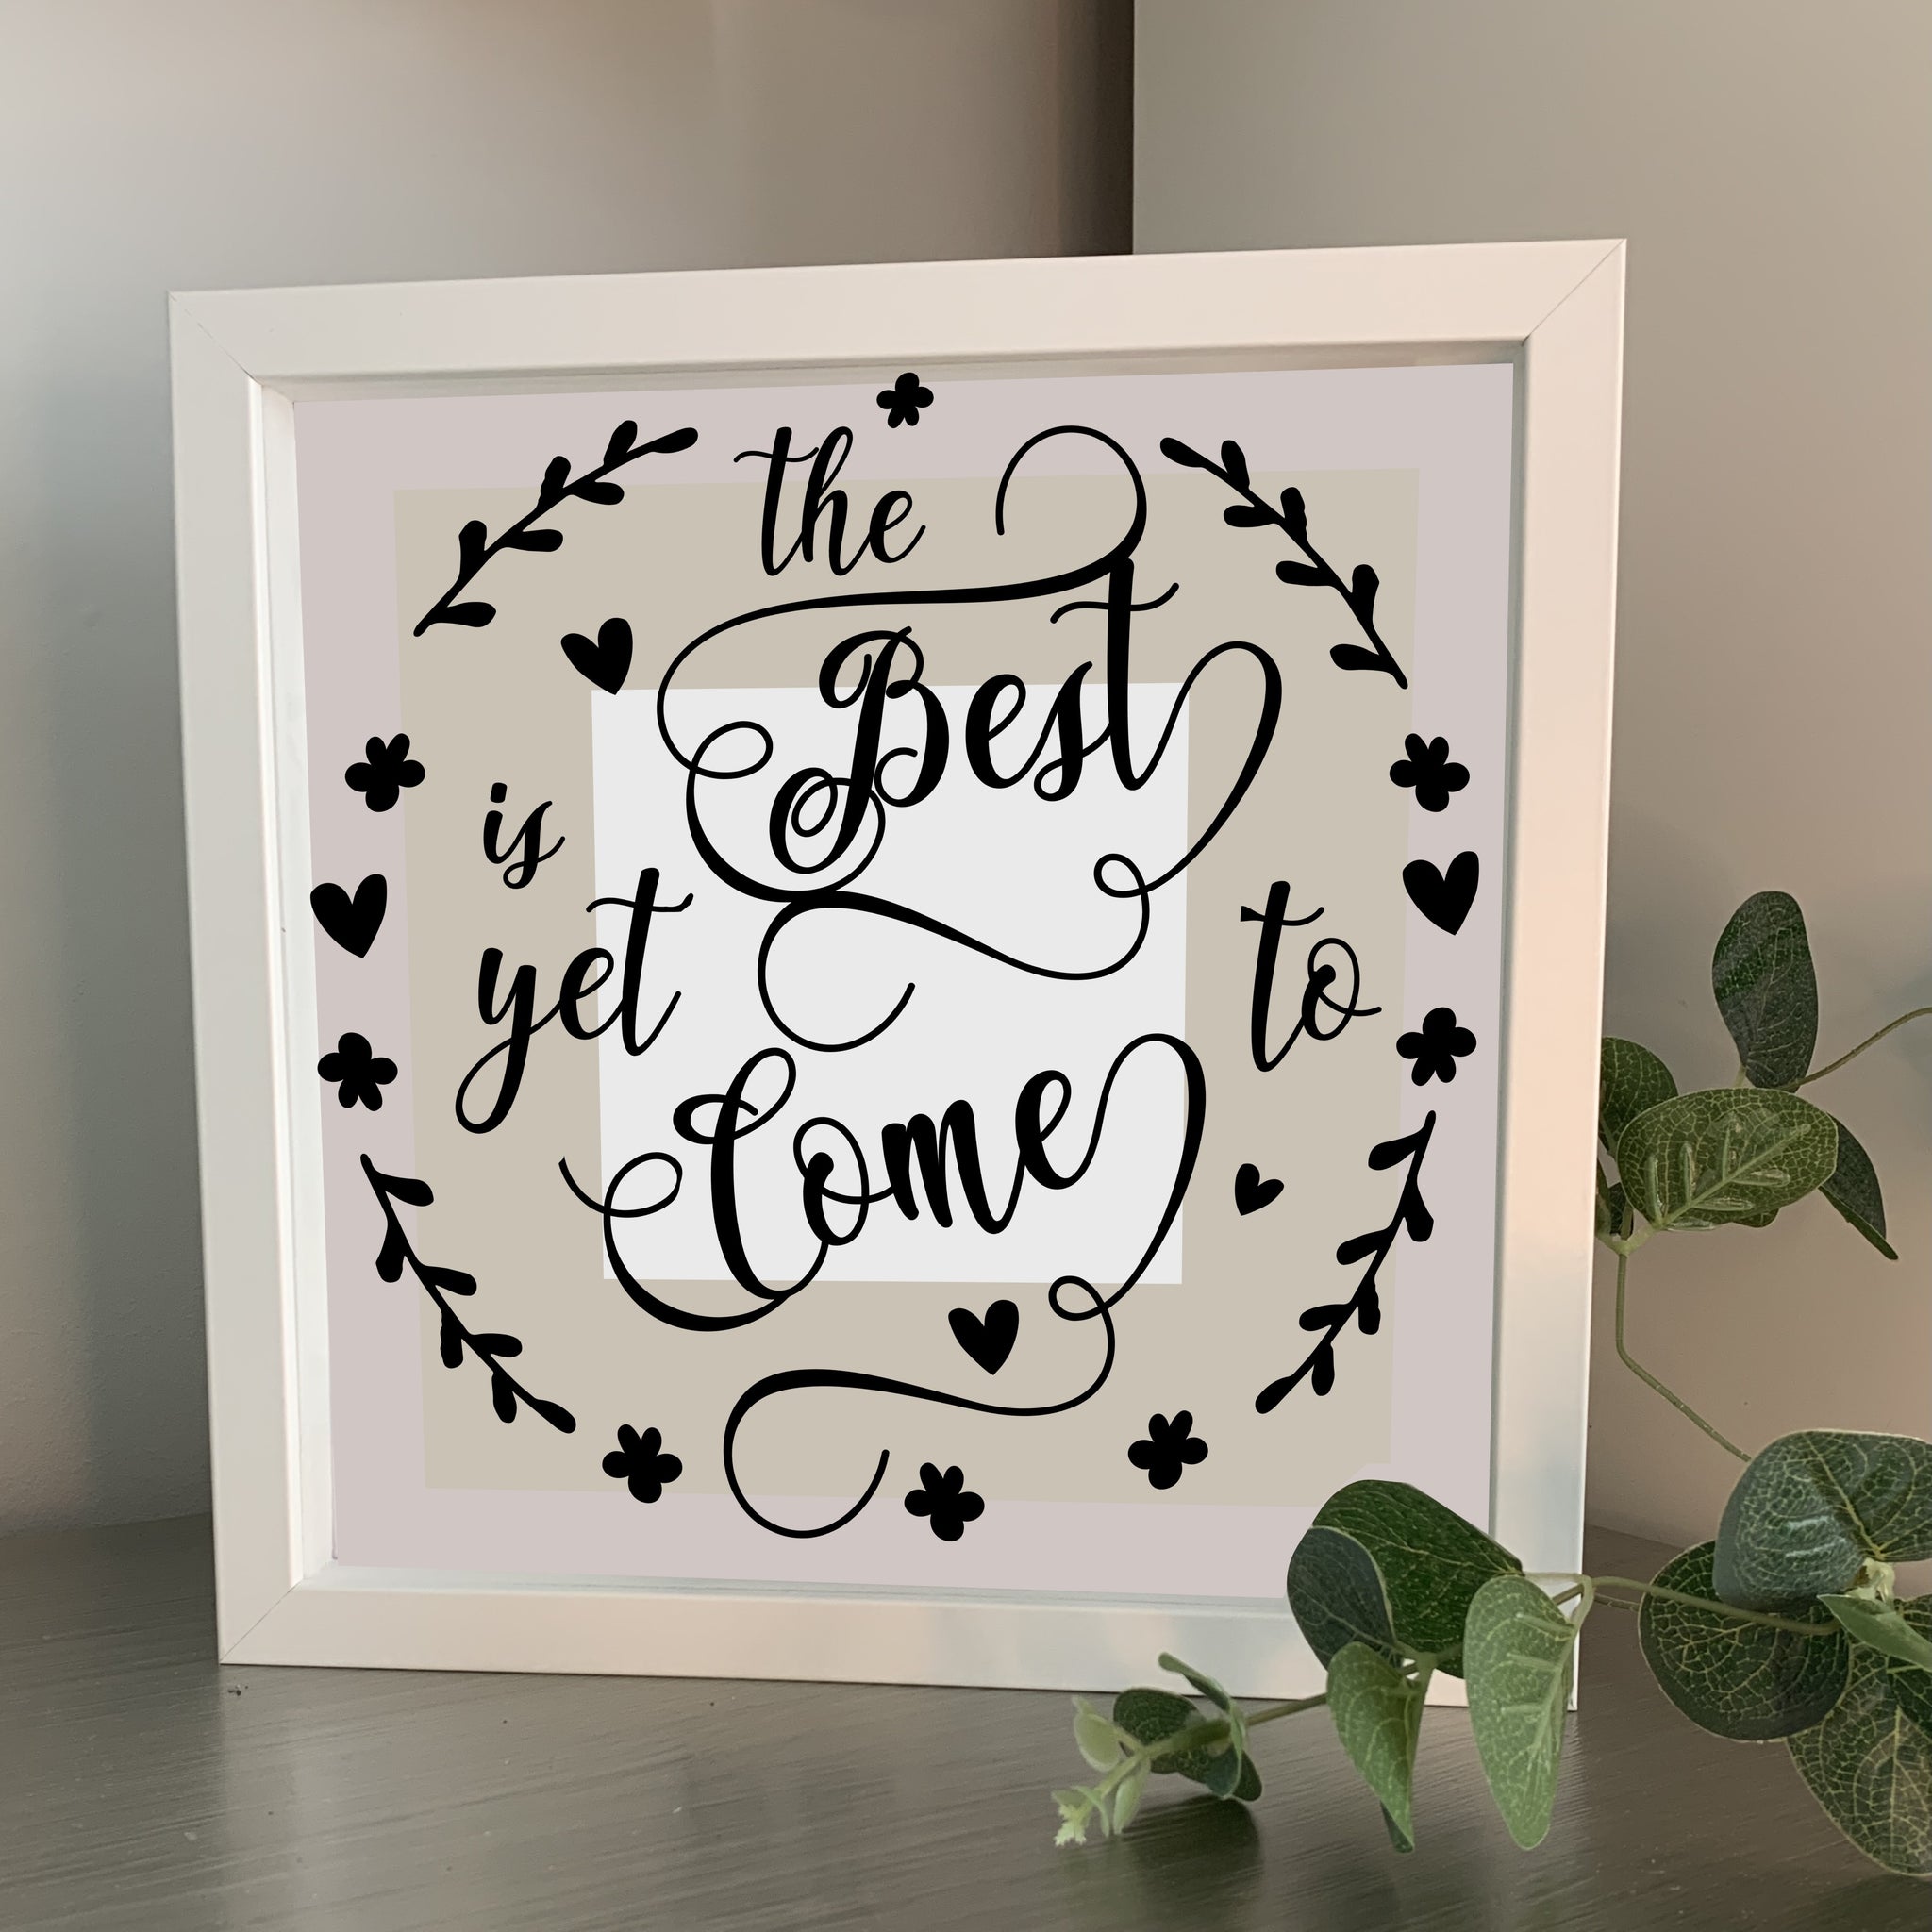 The Best is yet to come | Die Cut Vinyl Sticker | Complete Box Frame